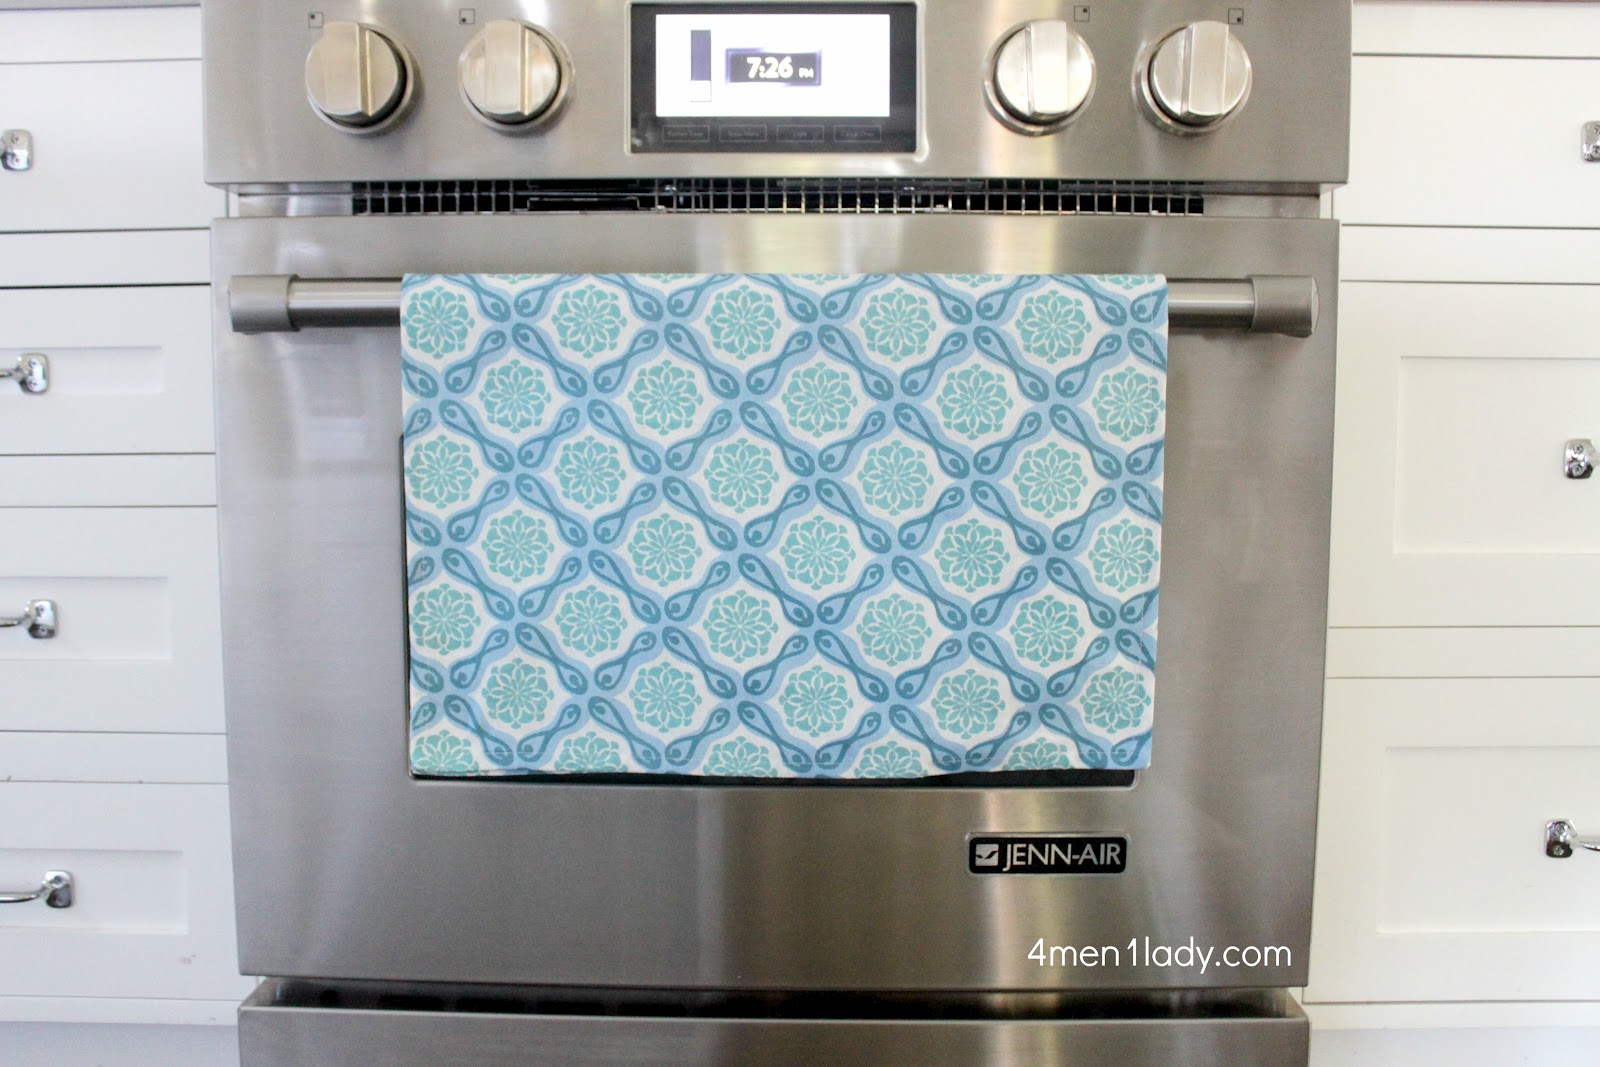 Easy fix for hanging dish towels.